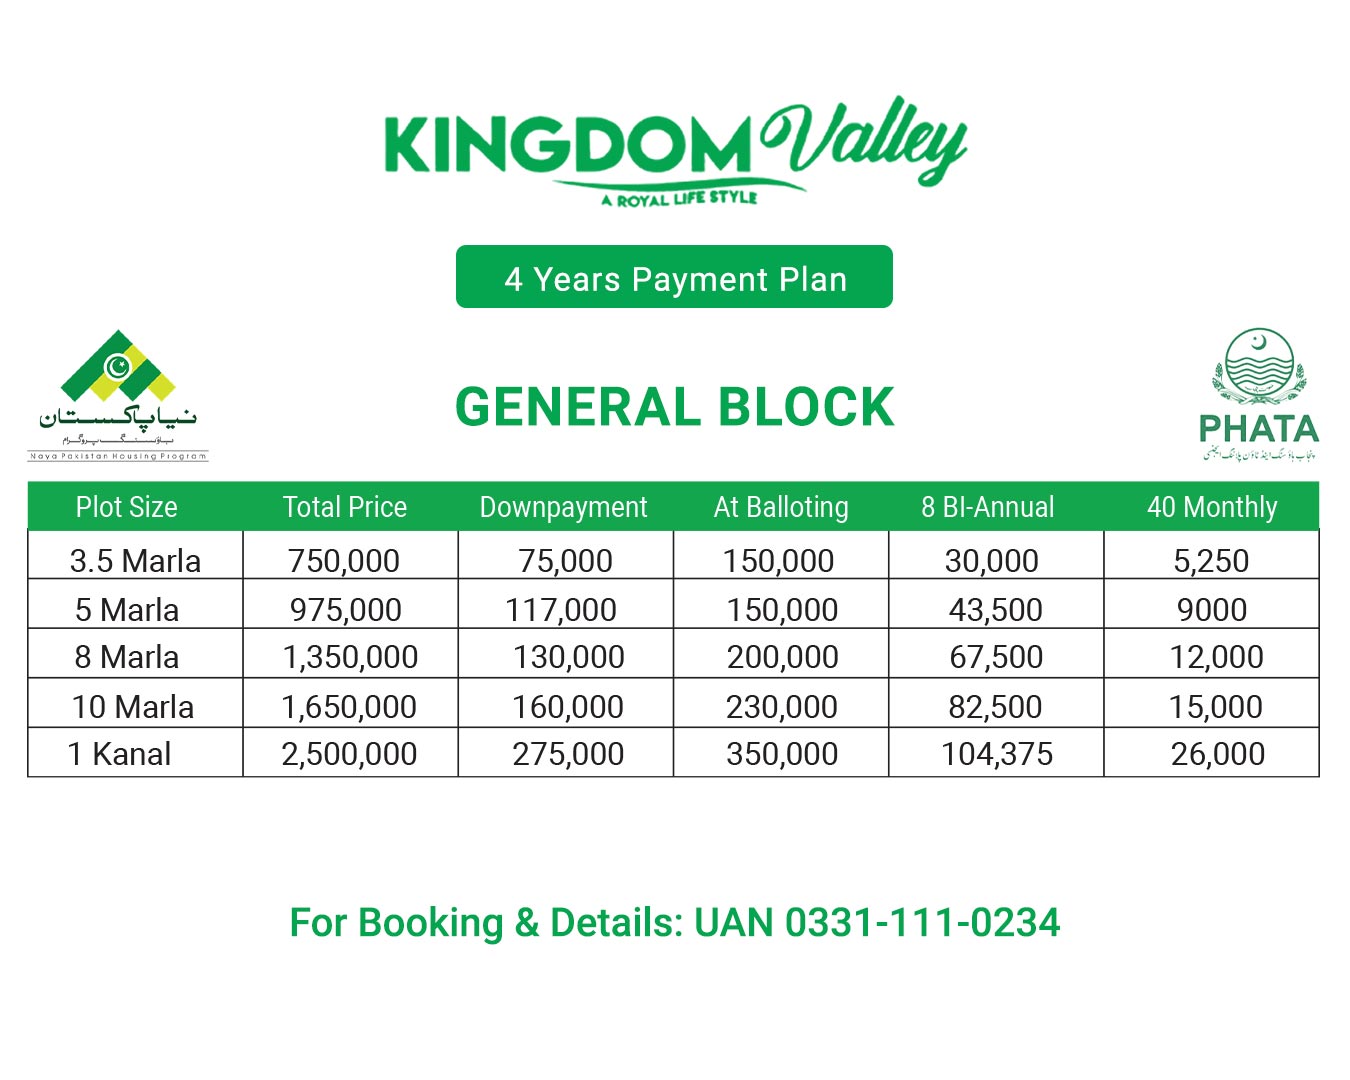 General block payment plan of kingdom valley Islamabad